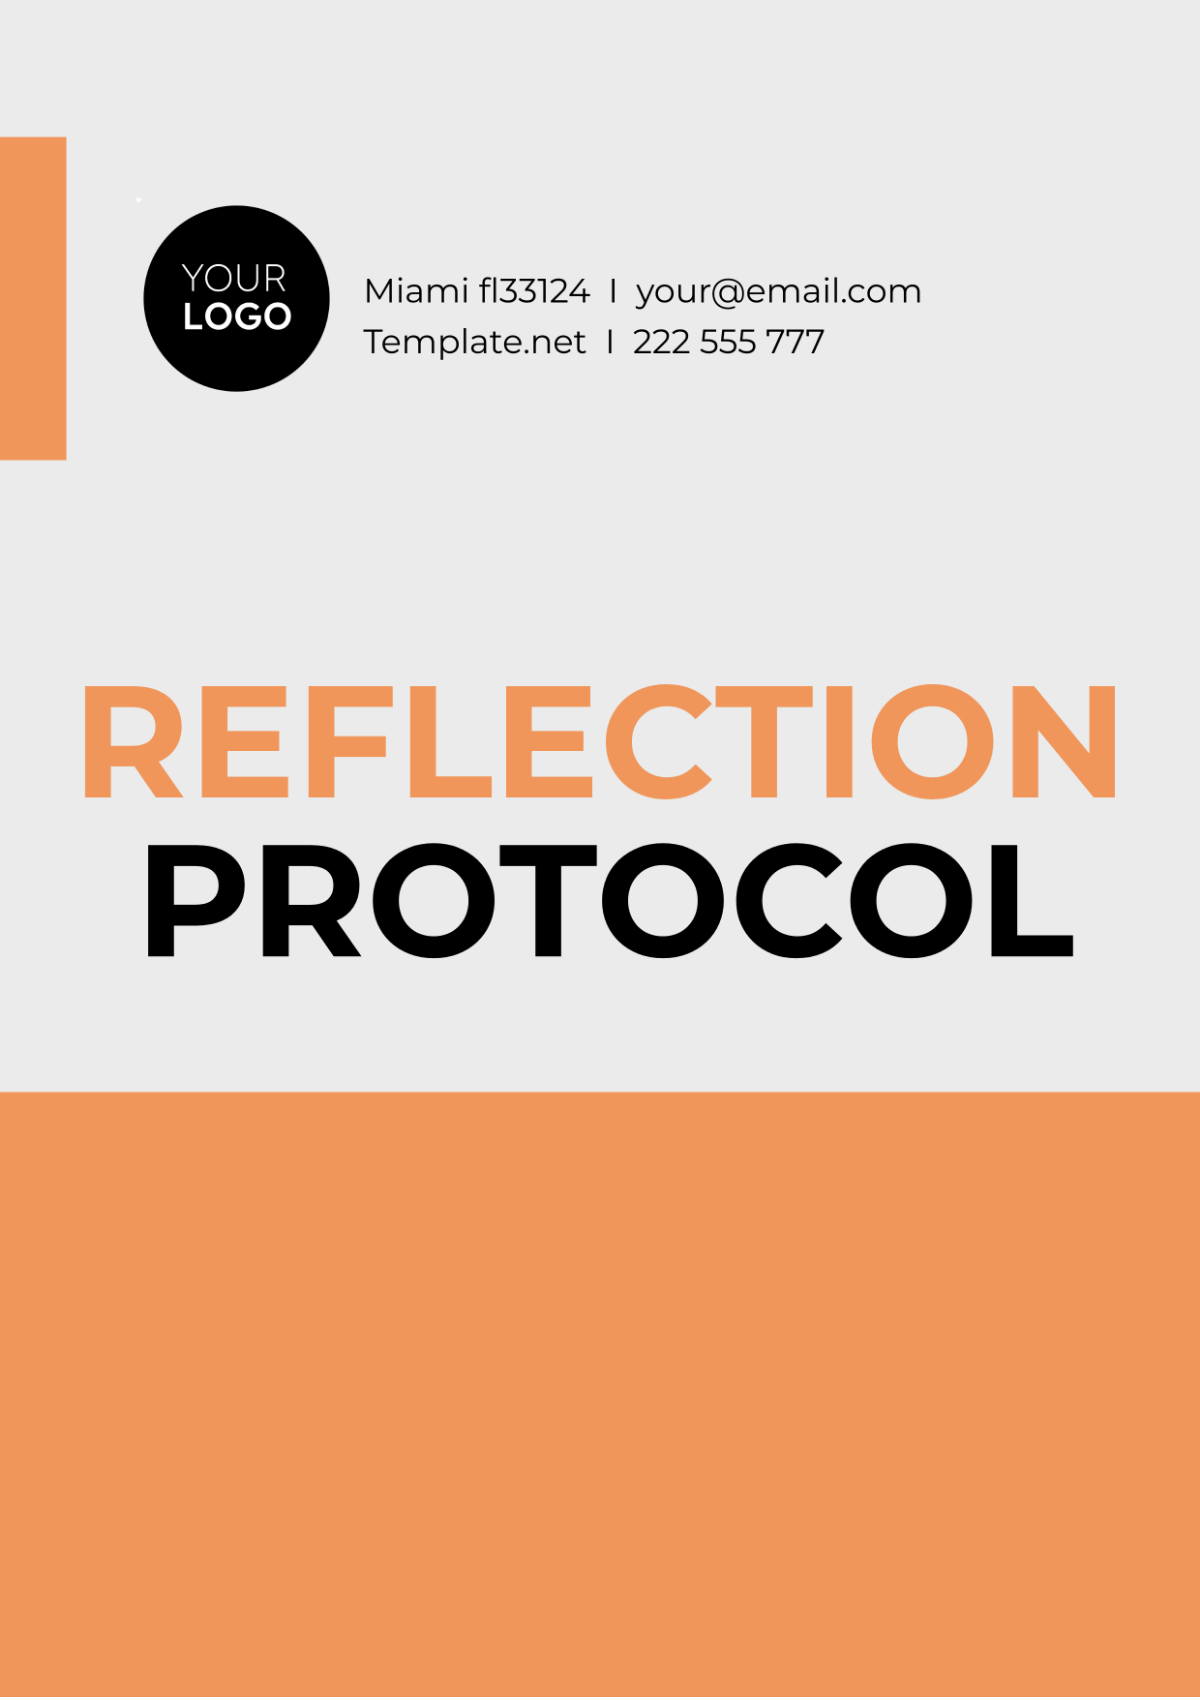 Reflection Protocol Template